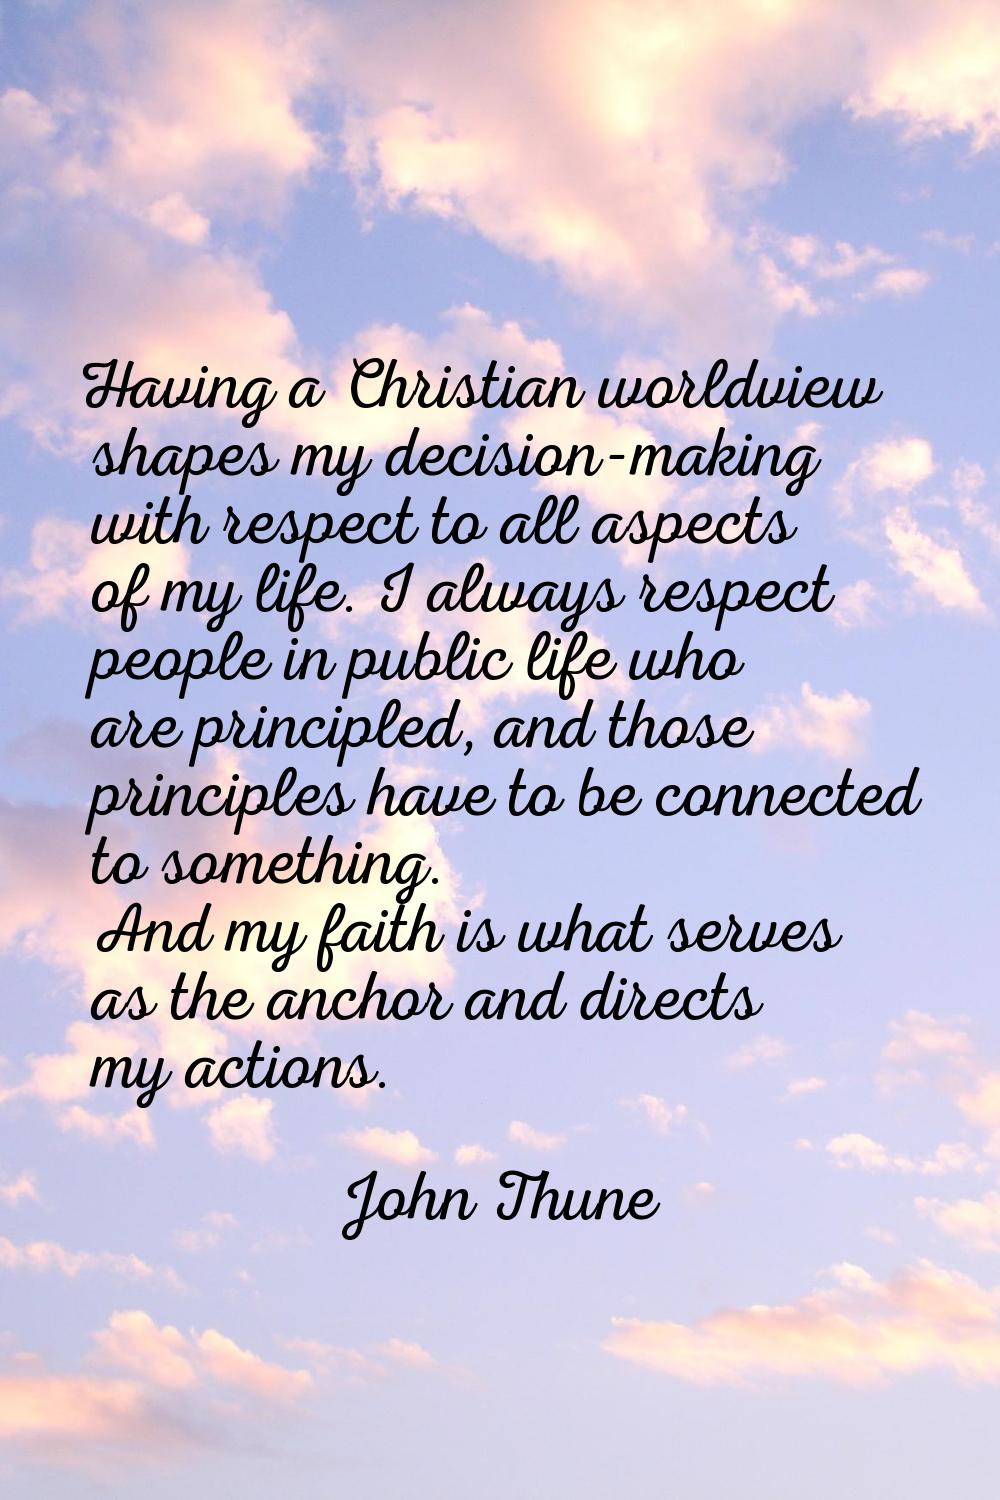 Having a Christian worldview shapes my decision-making with respect to all aspects of my life. I al